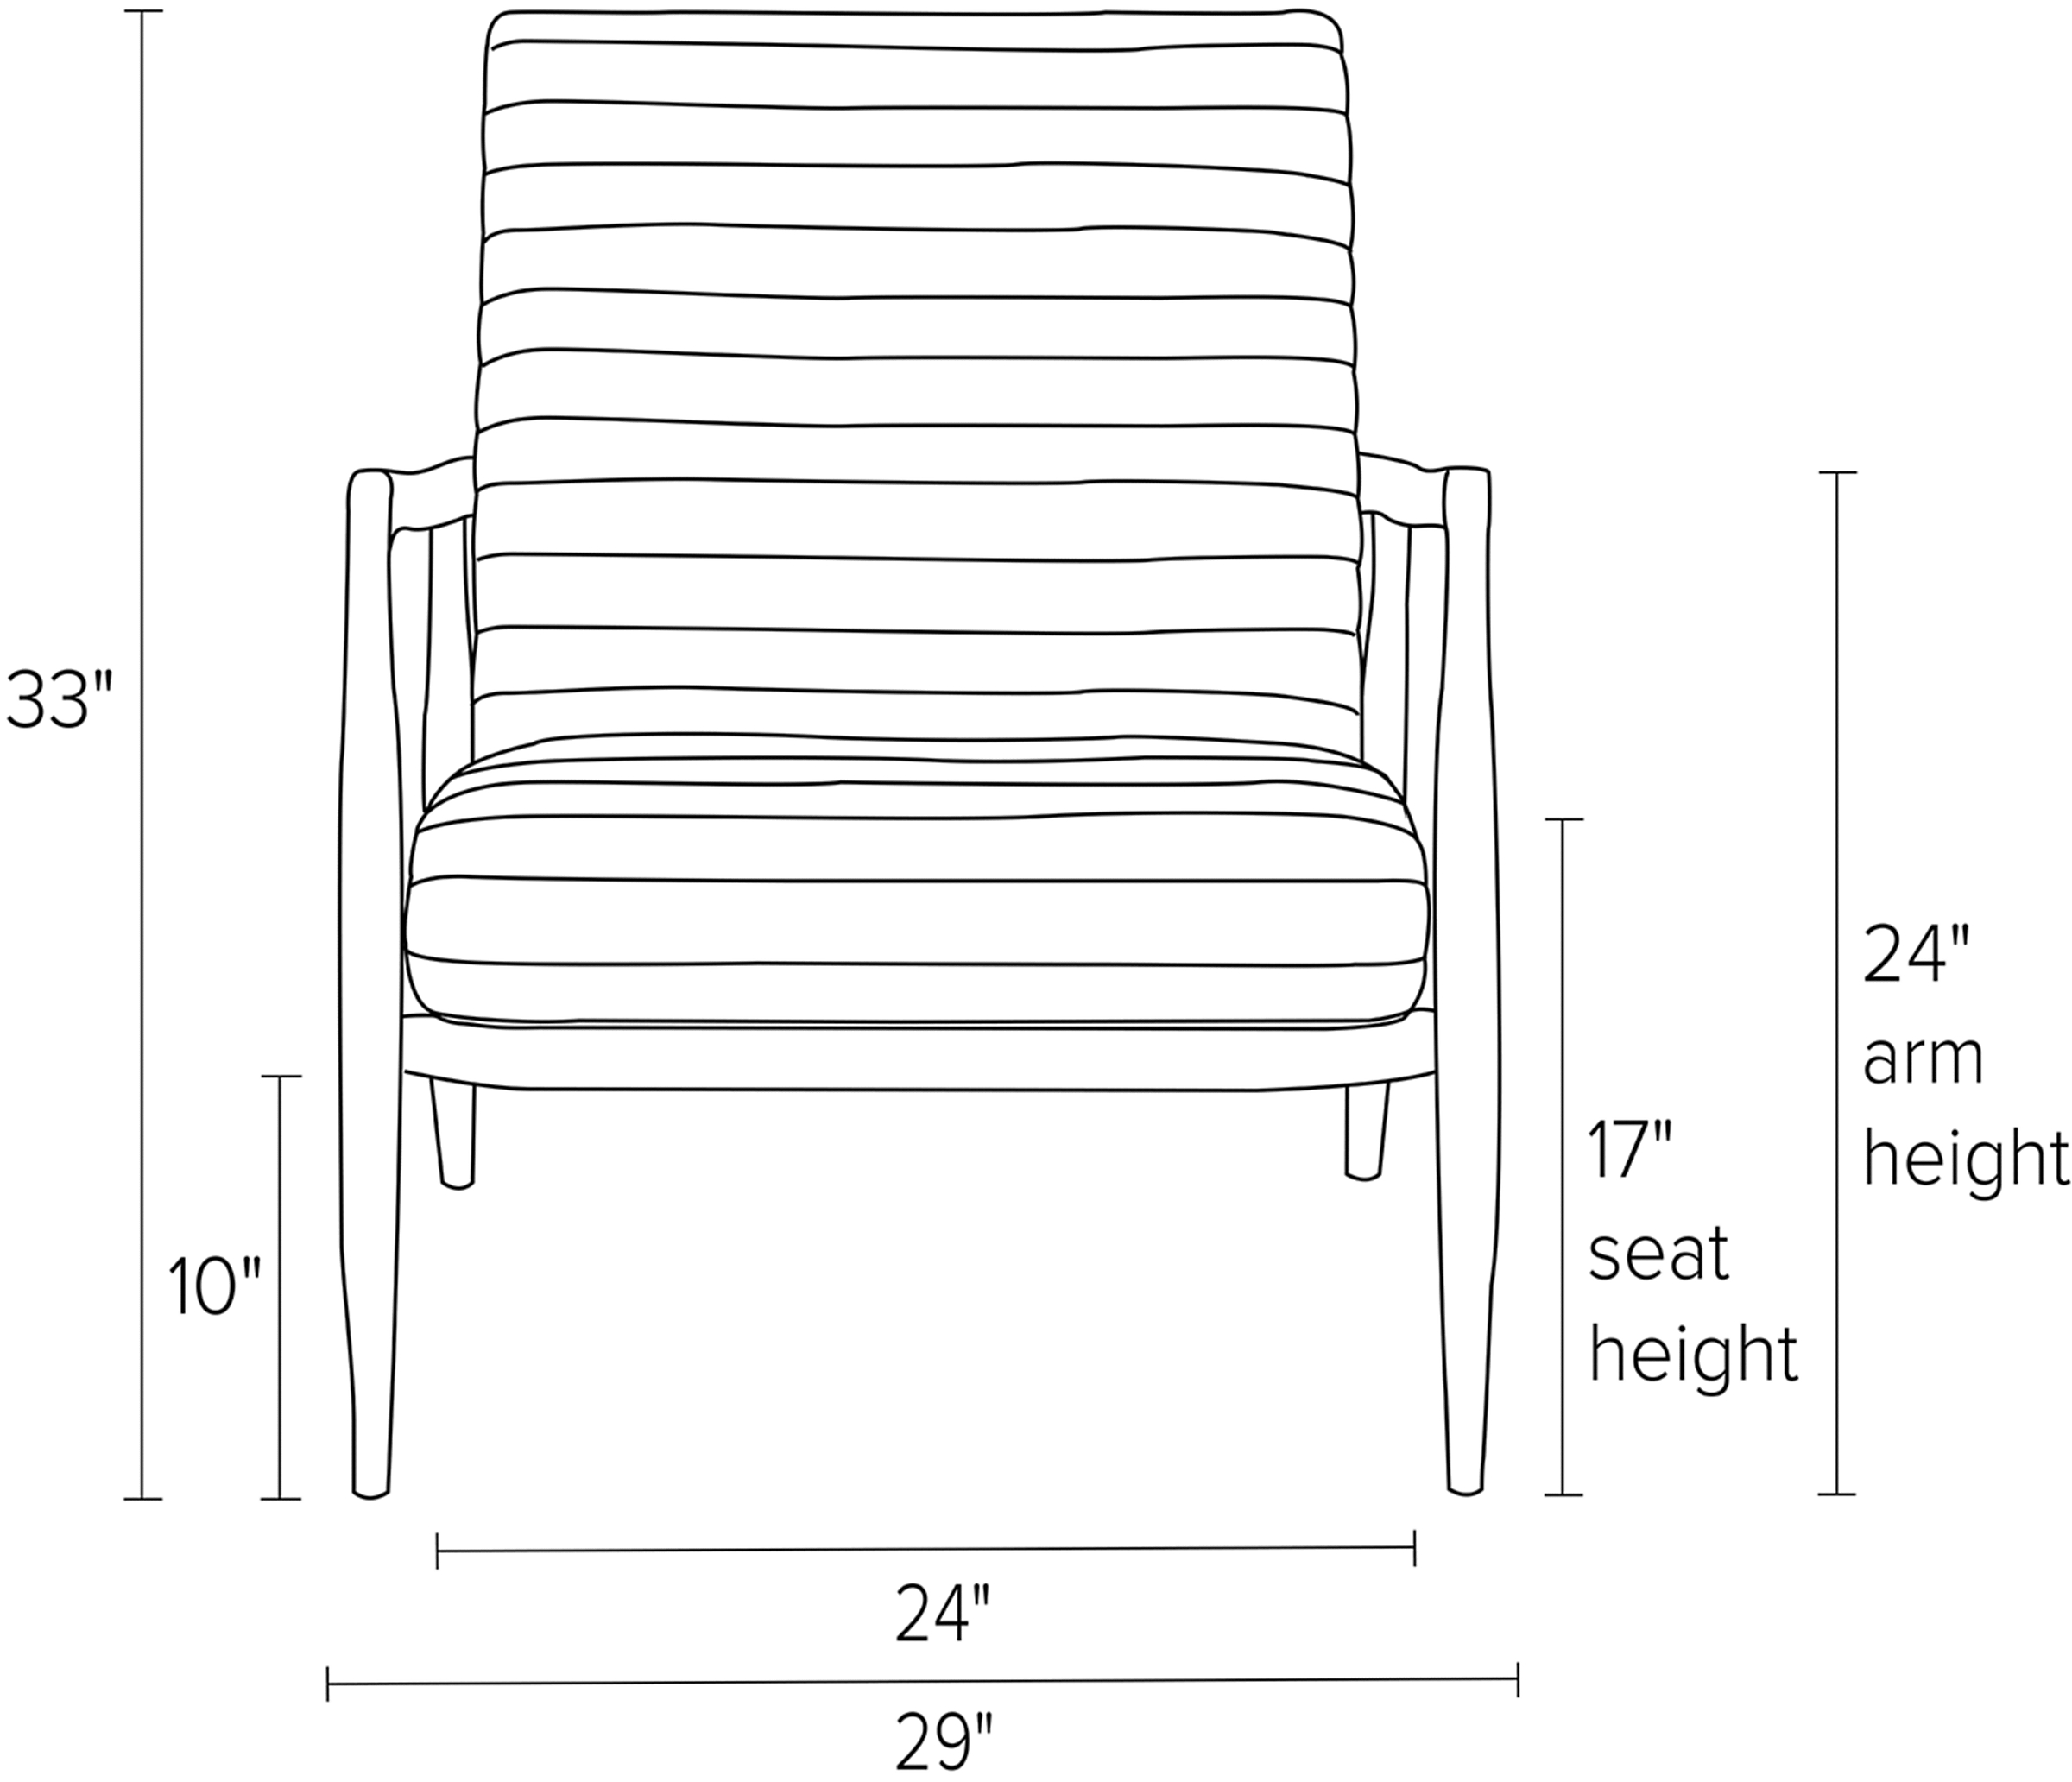 Front view dimension illustration of Callan chair.